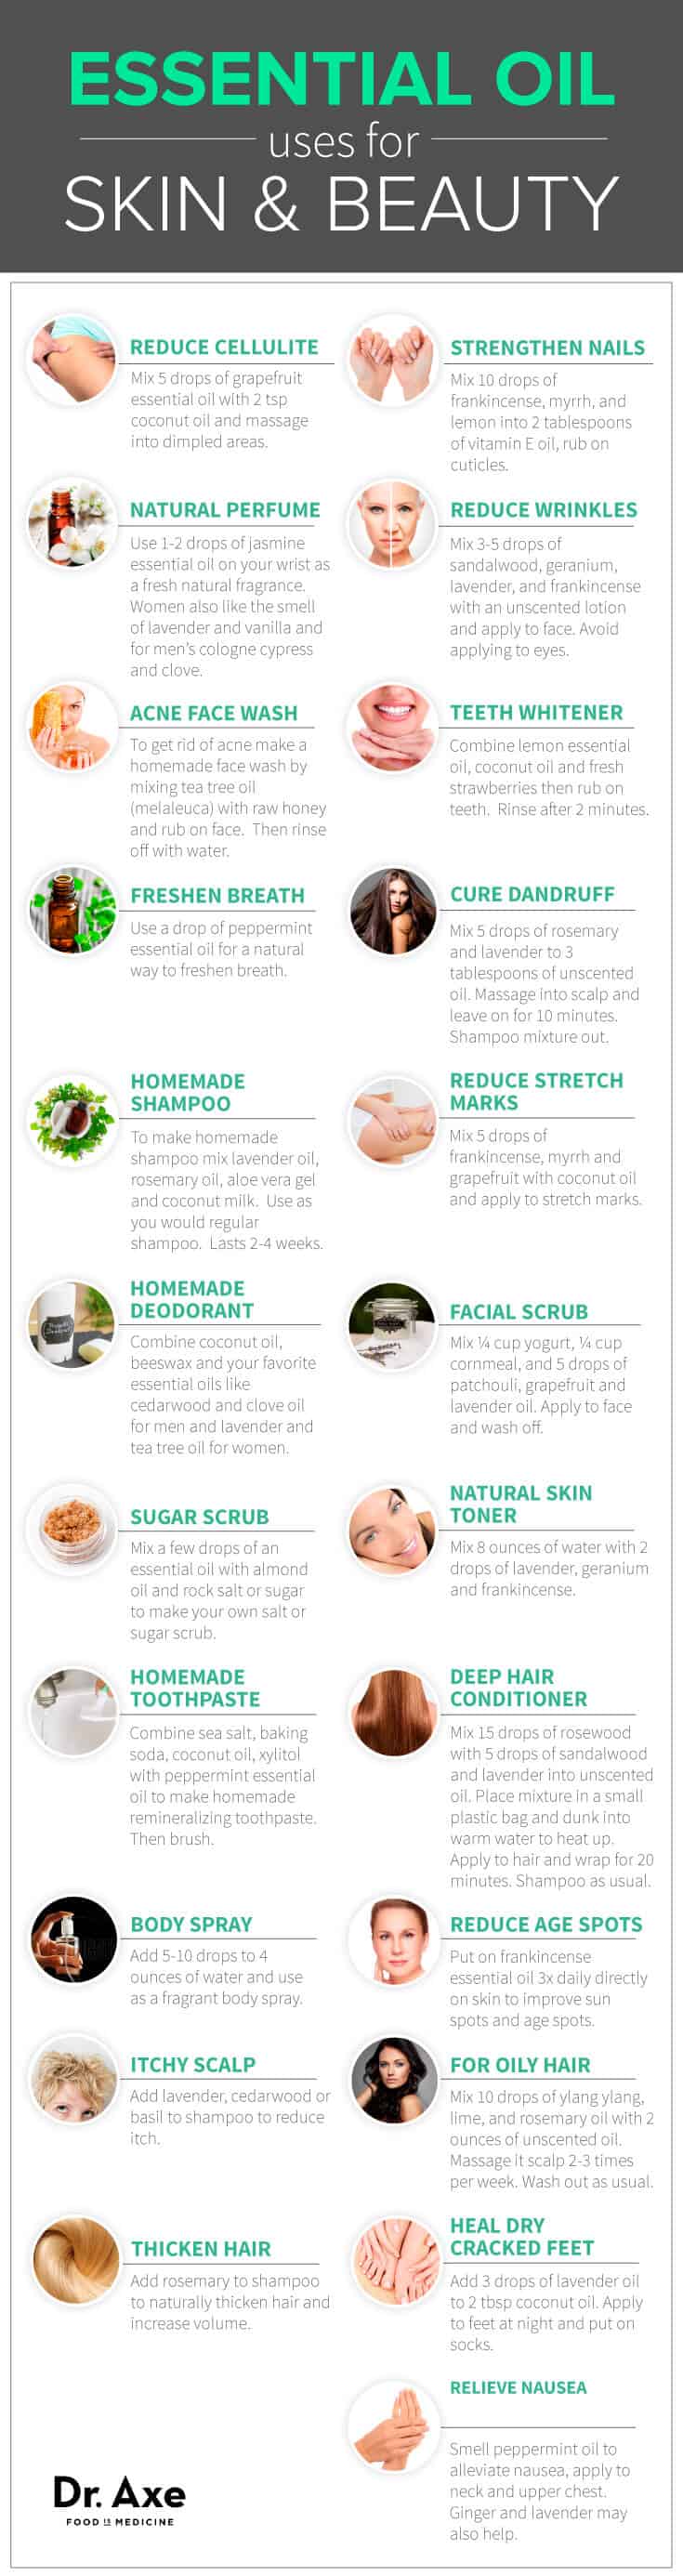 Essential Oils Uses for Skin and Beauty